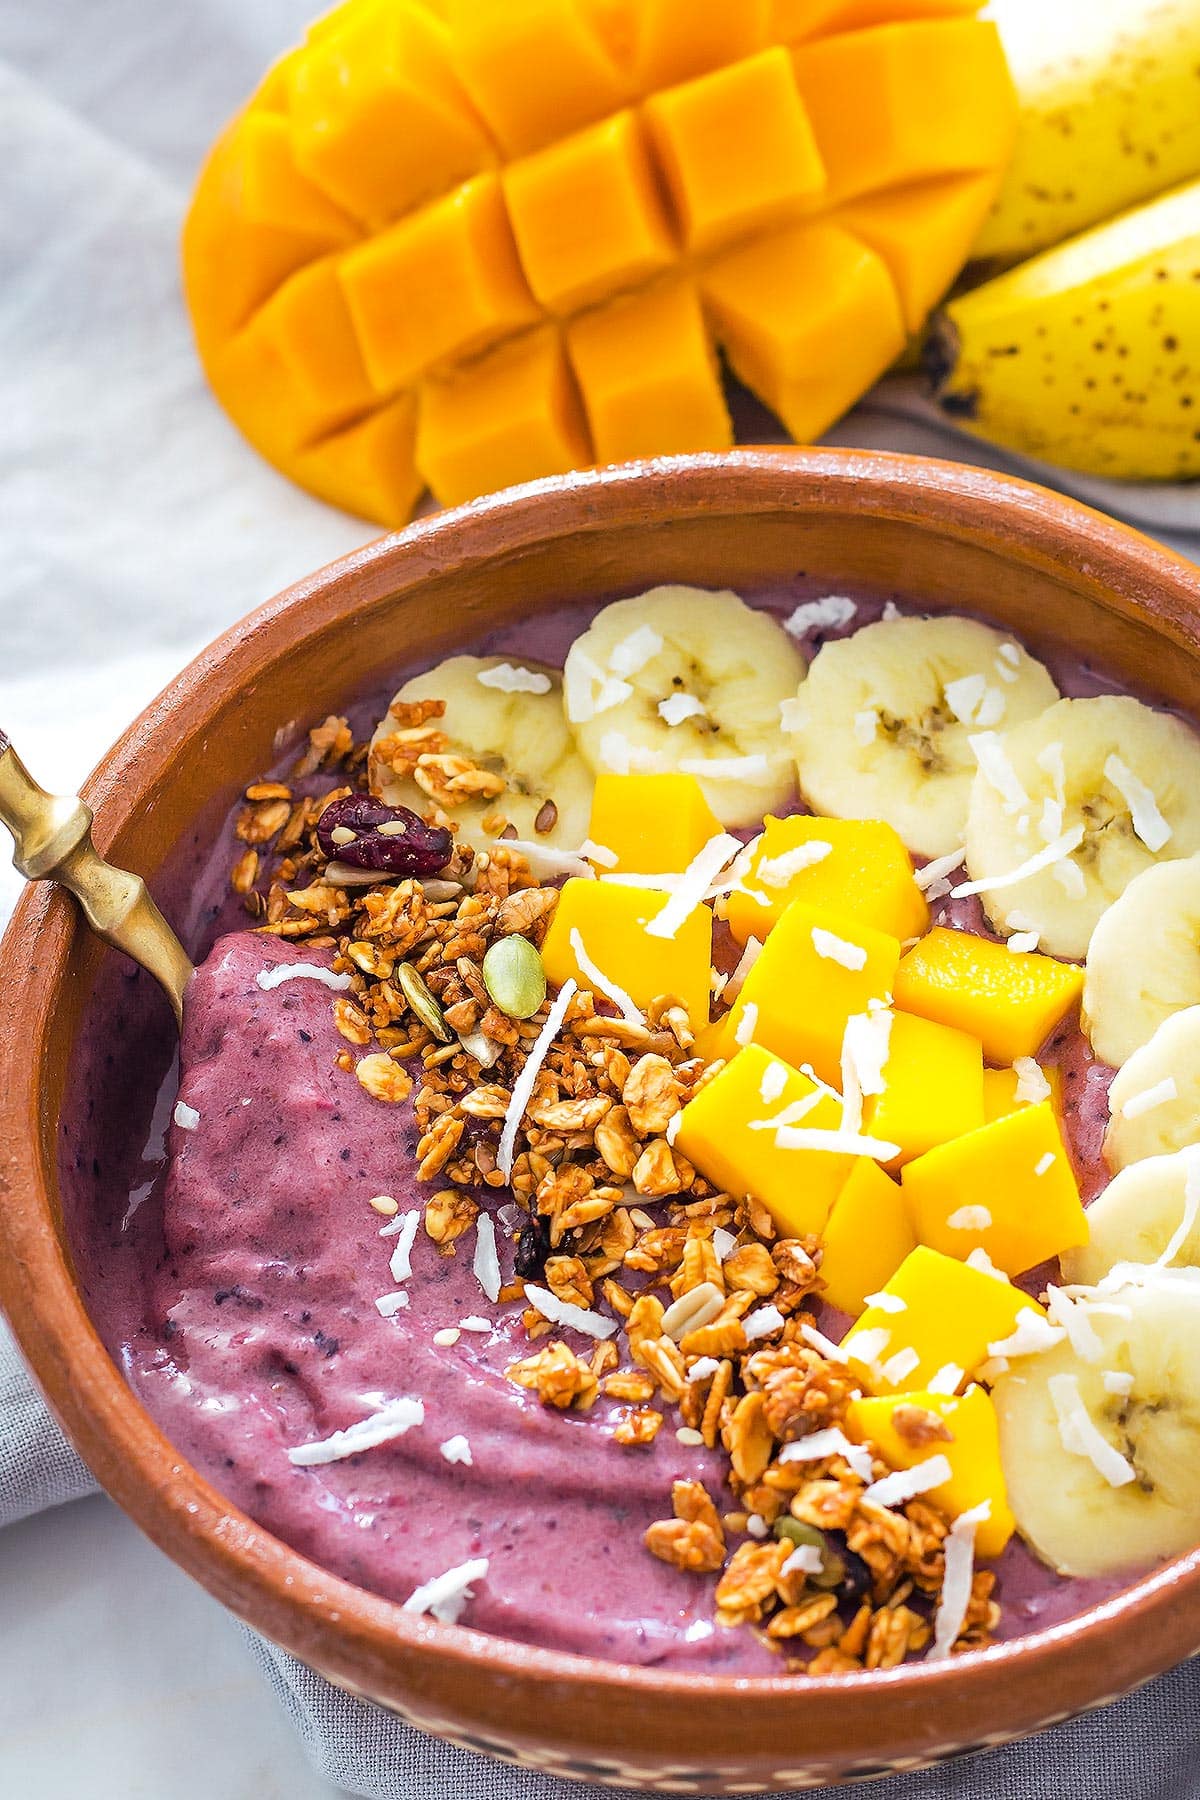 Spoon in Smoothie Bowl made with Acai Puree